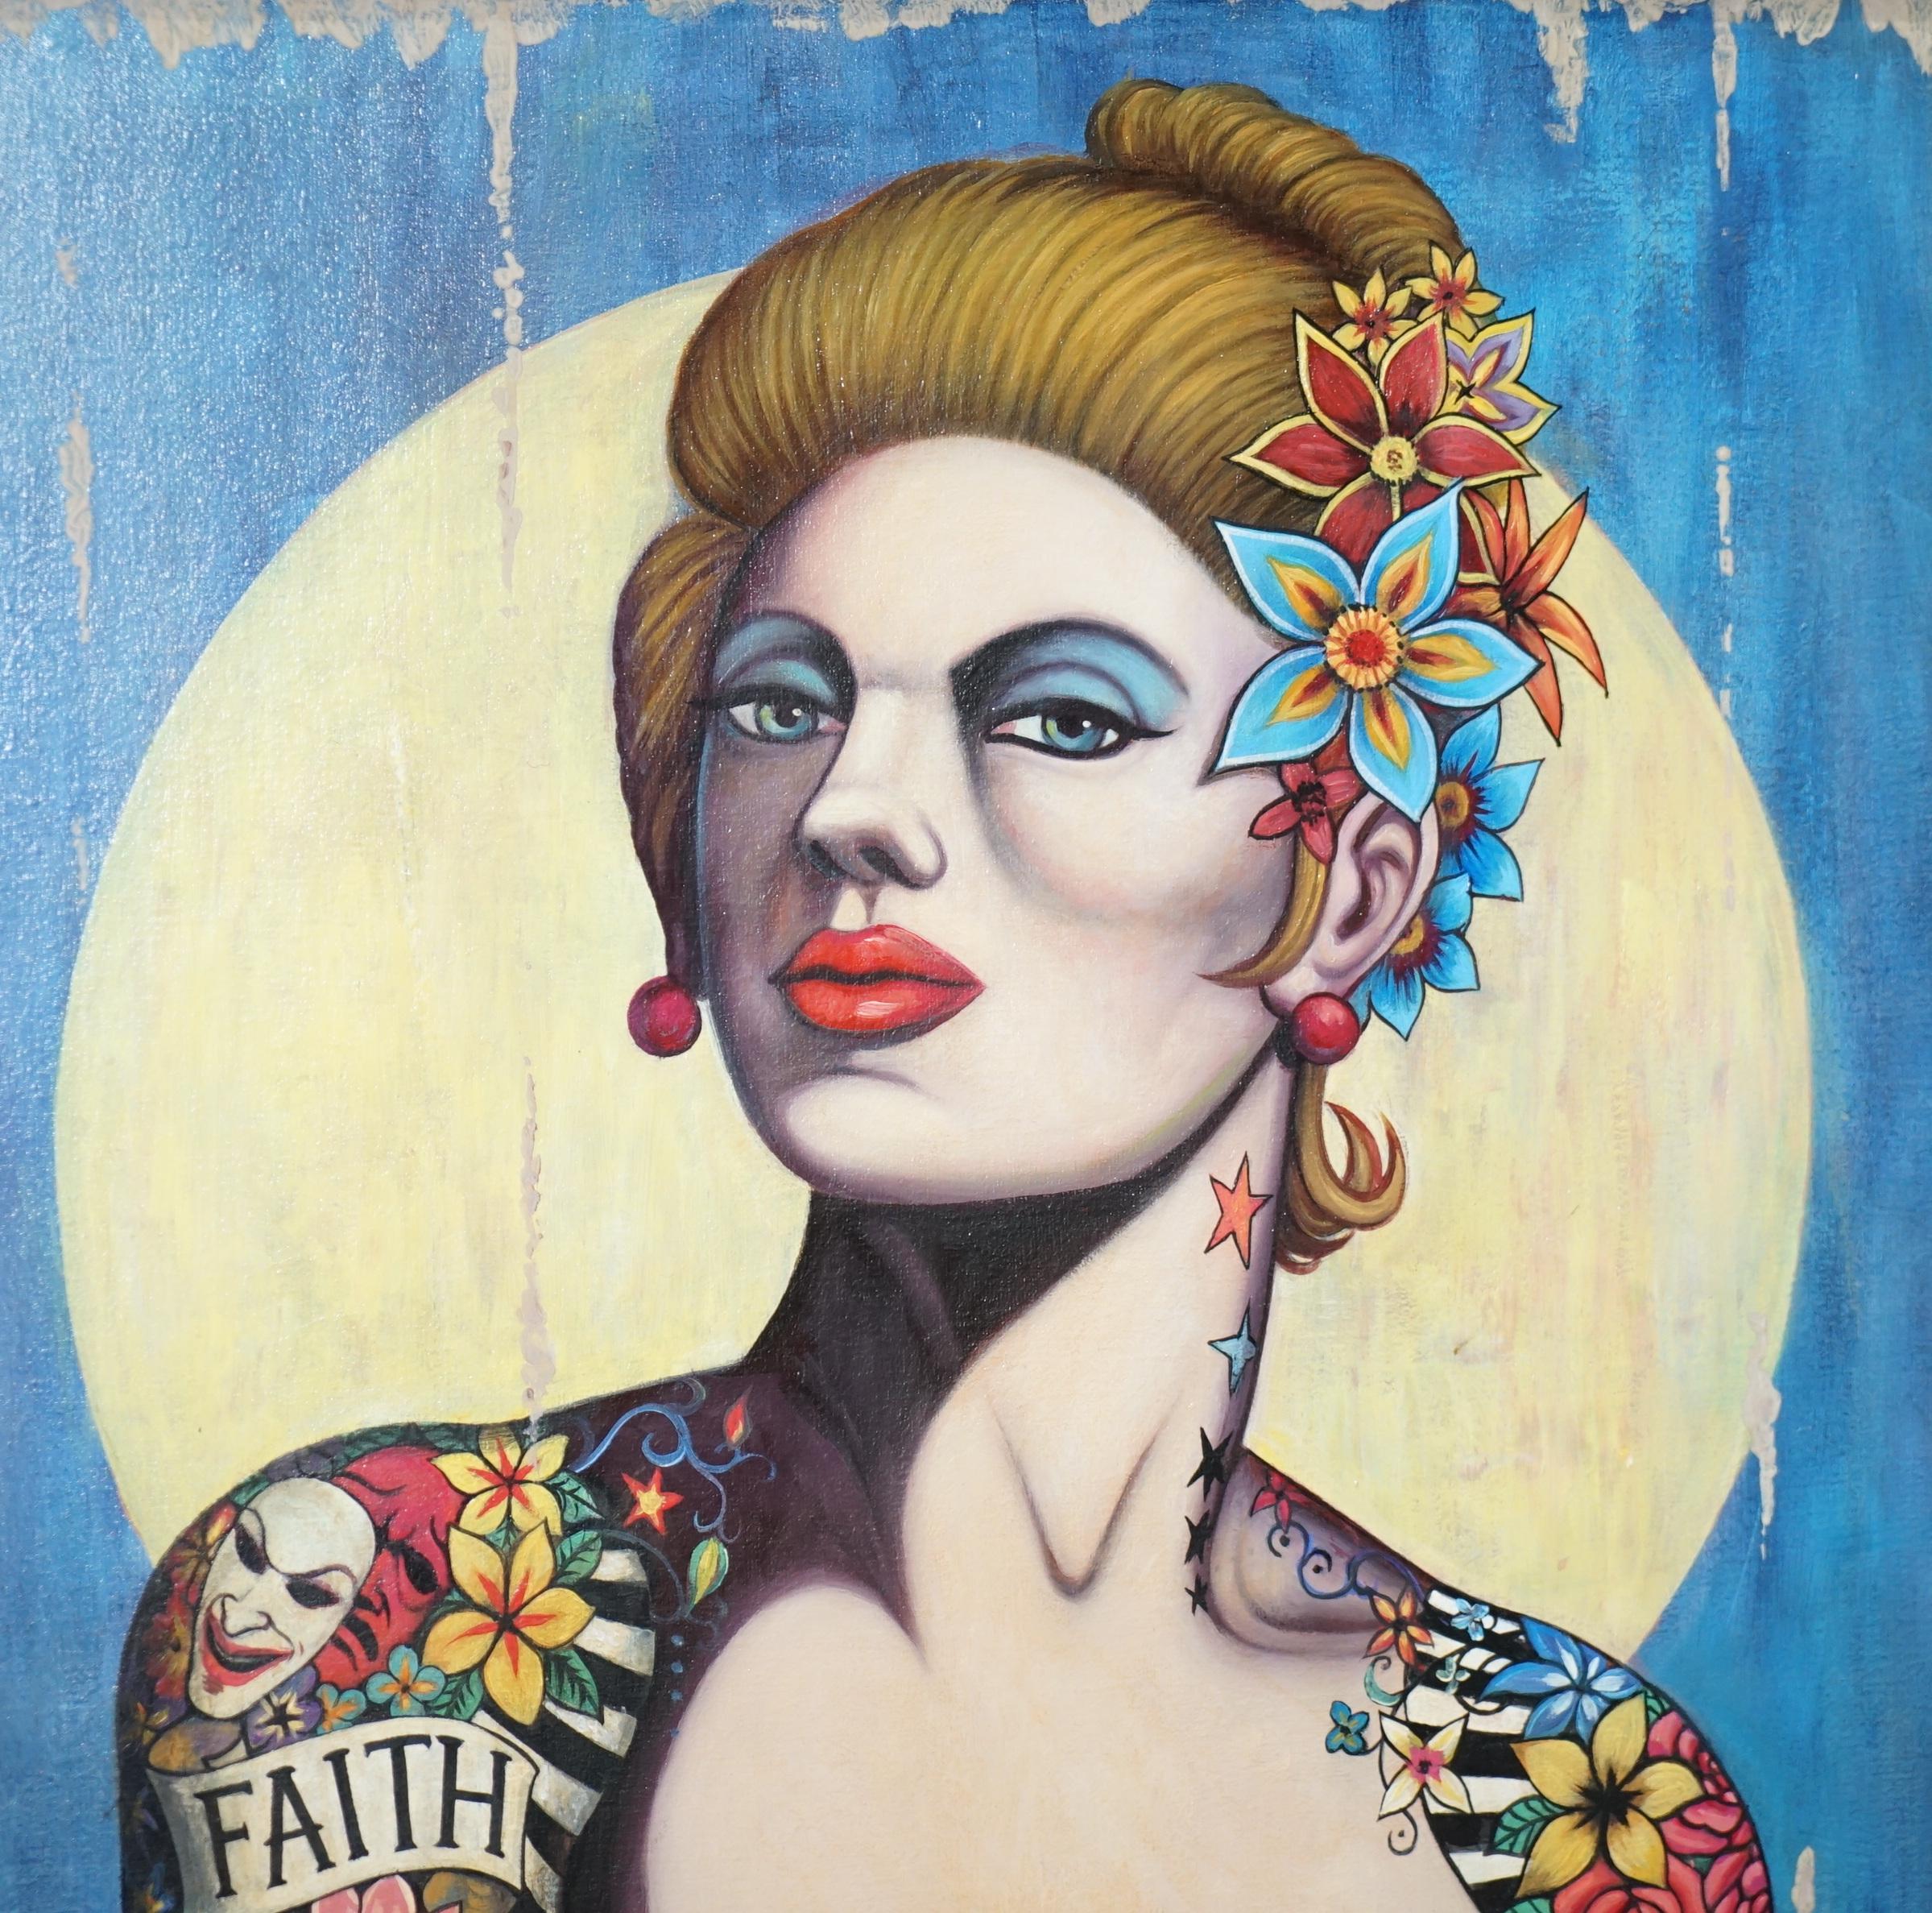 Hand-Crafted Sublime David Hall Oil on Boarding Painting of a Very Cool Heavily Tattooed Chic